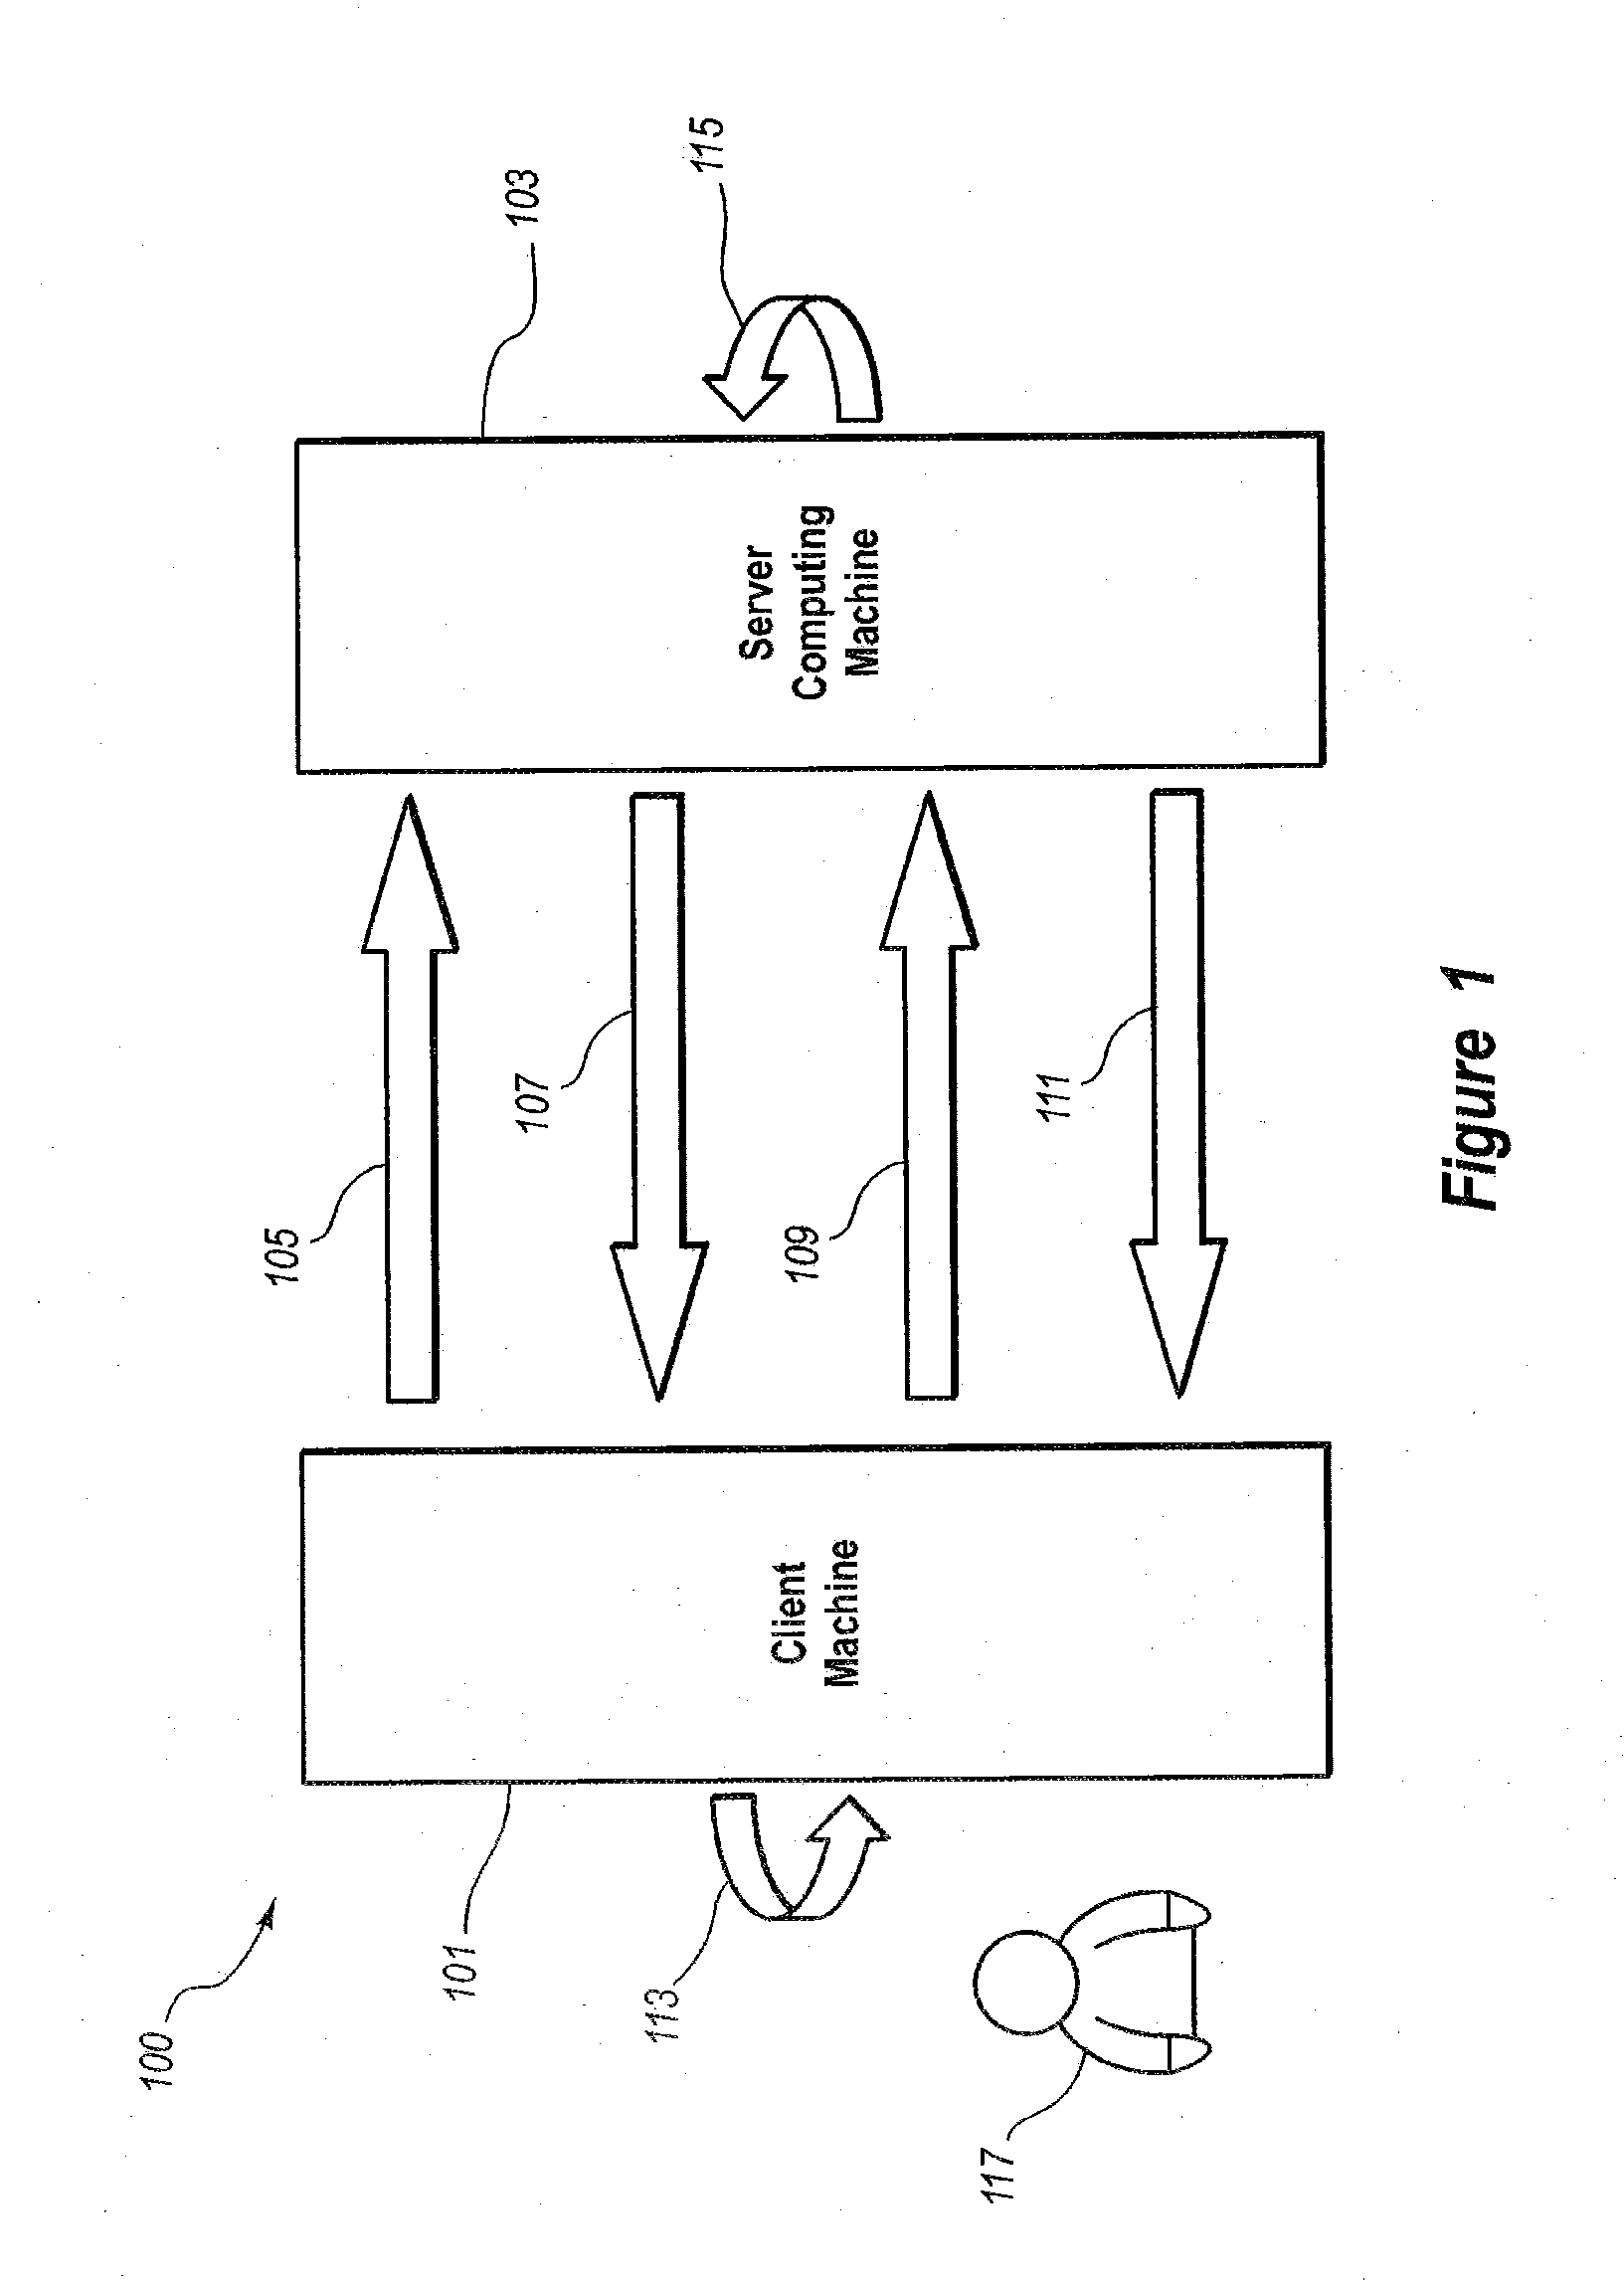 System and method for monitoring human interaction